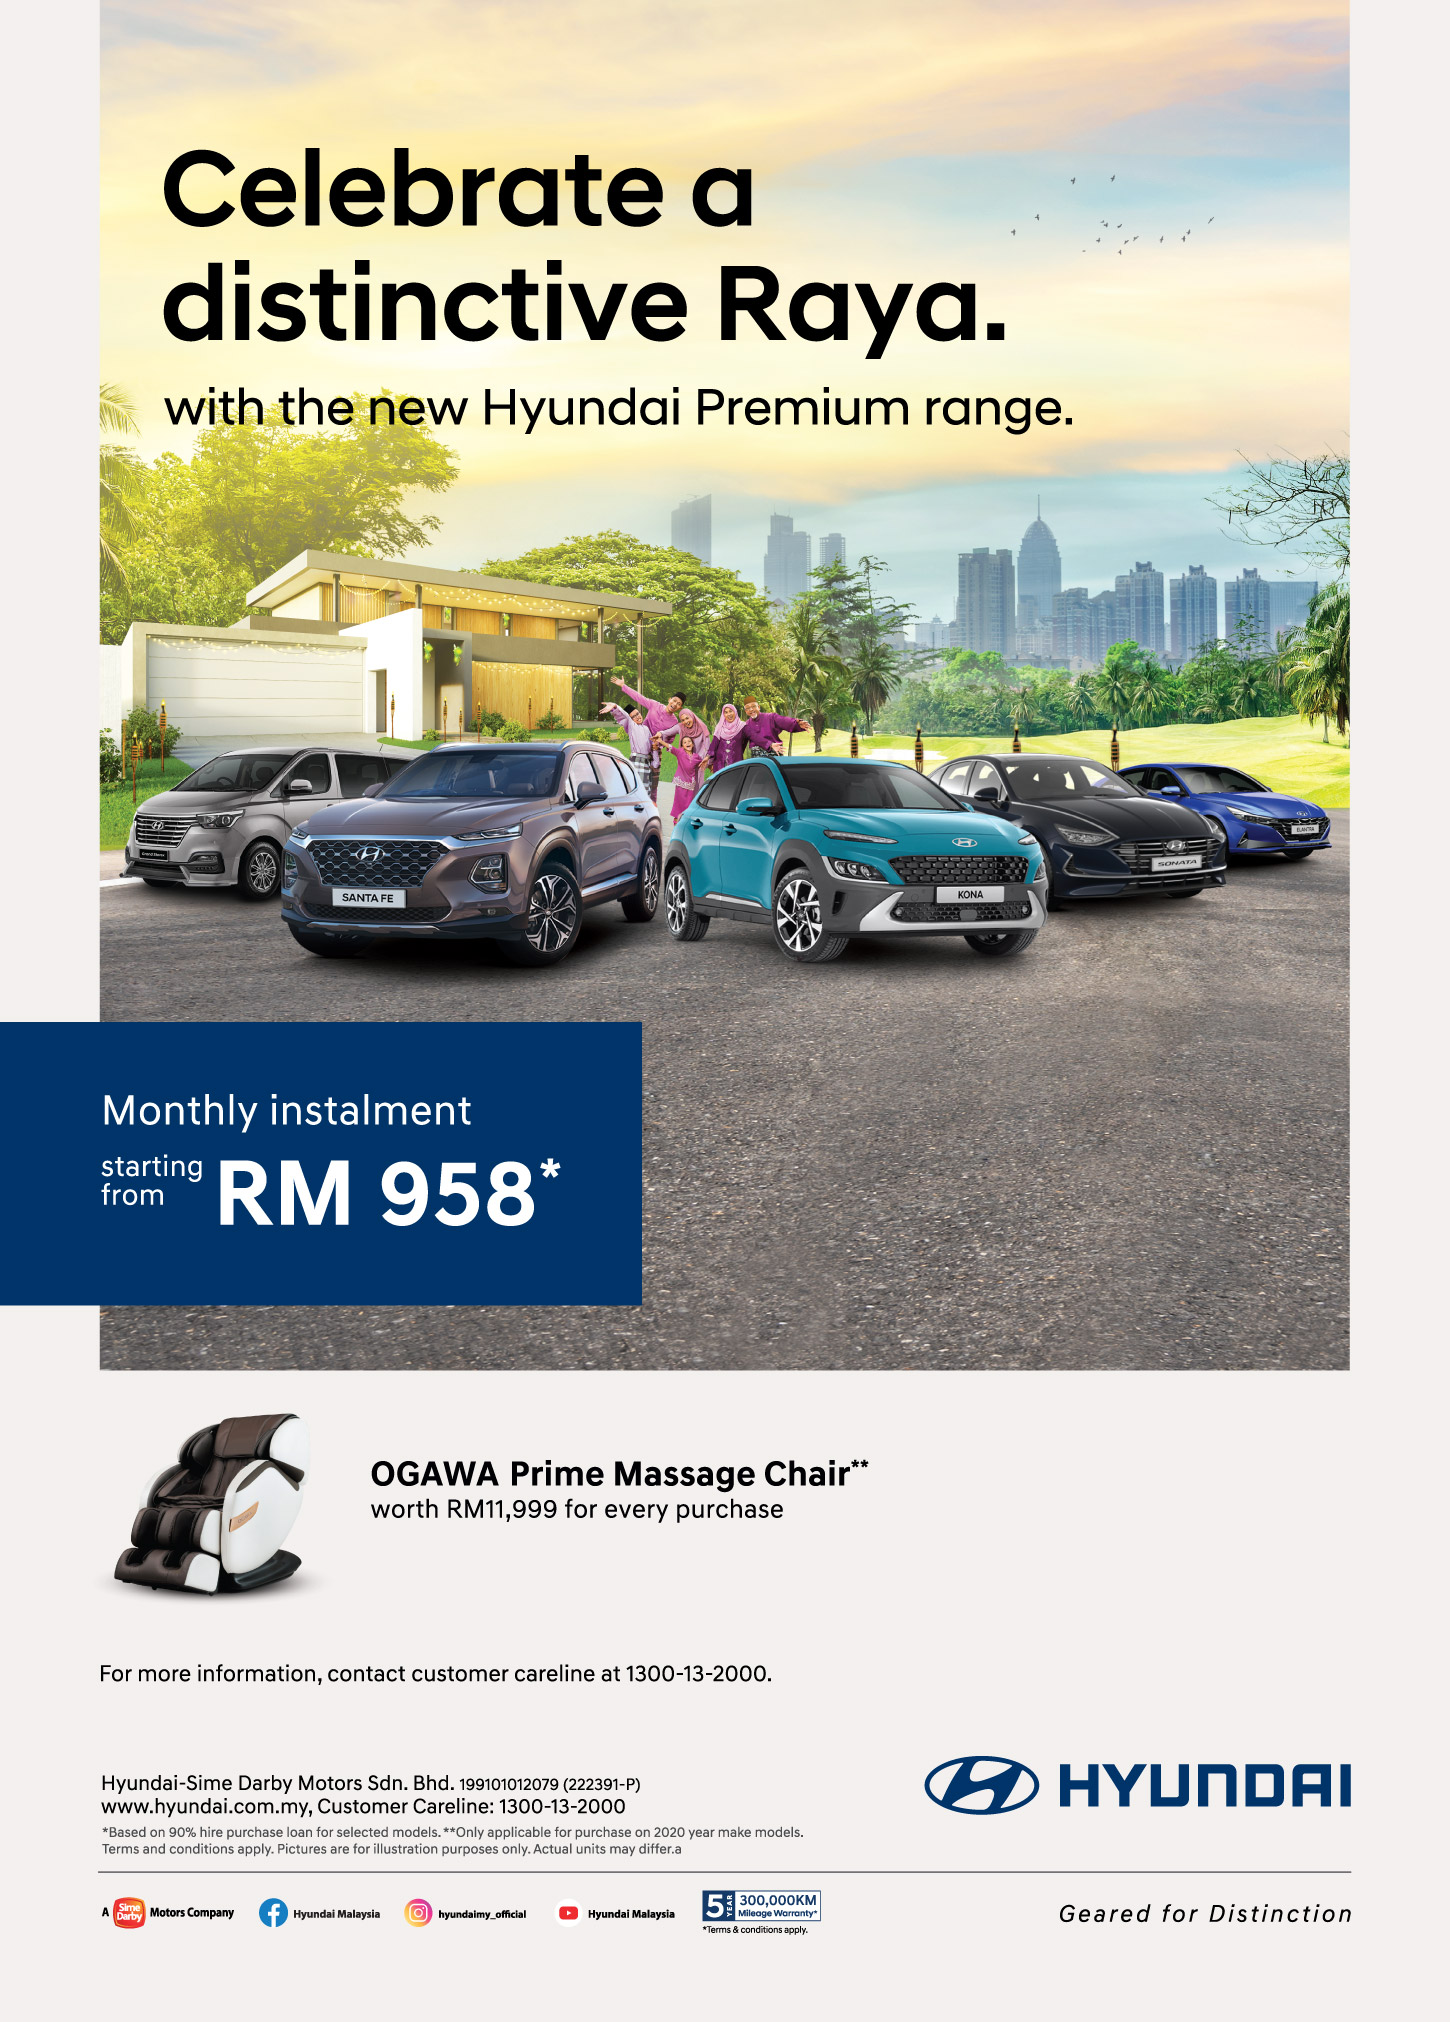 Celebrate a distinction Raya with the new Hyundai Premium range. | Get OGAWA Prime Massage Chair** worth RM11,999 for every purchase. | Monthly Instalment starting from RM 958*. | For more information, contact customer careline at 1300-13-2000. Terms & conditiona apply.